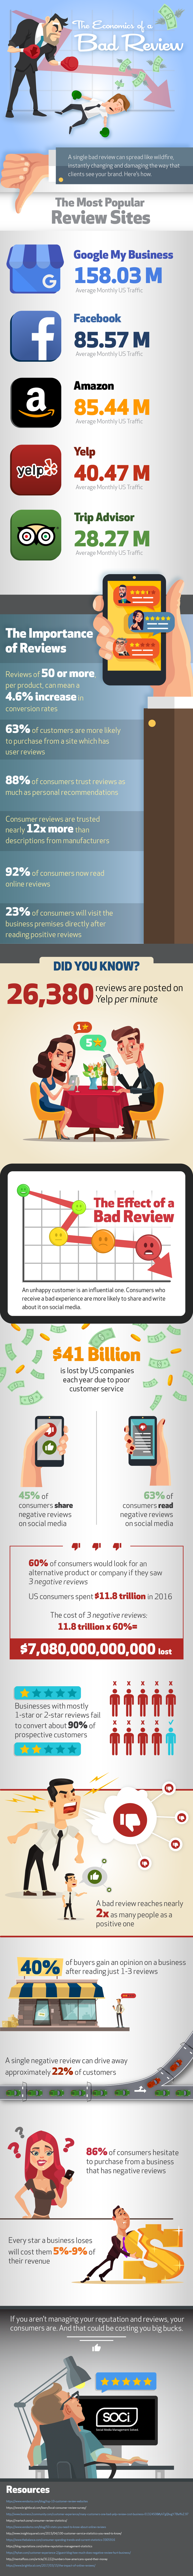 The-Economics-of-a-Bad-Review-infographic